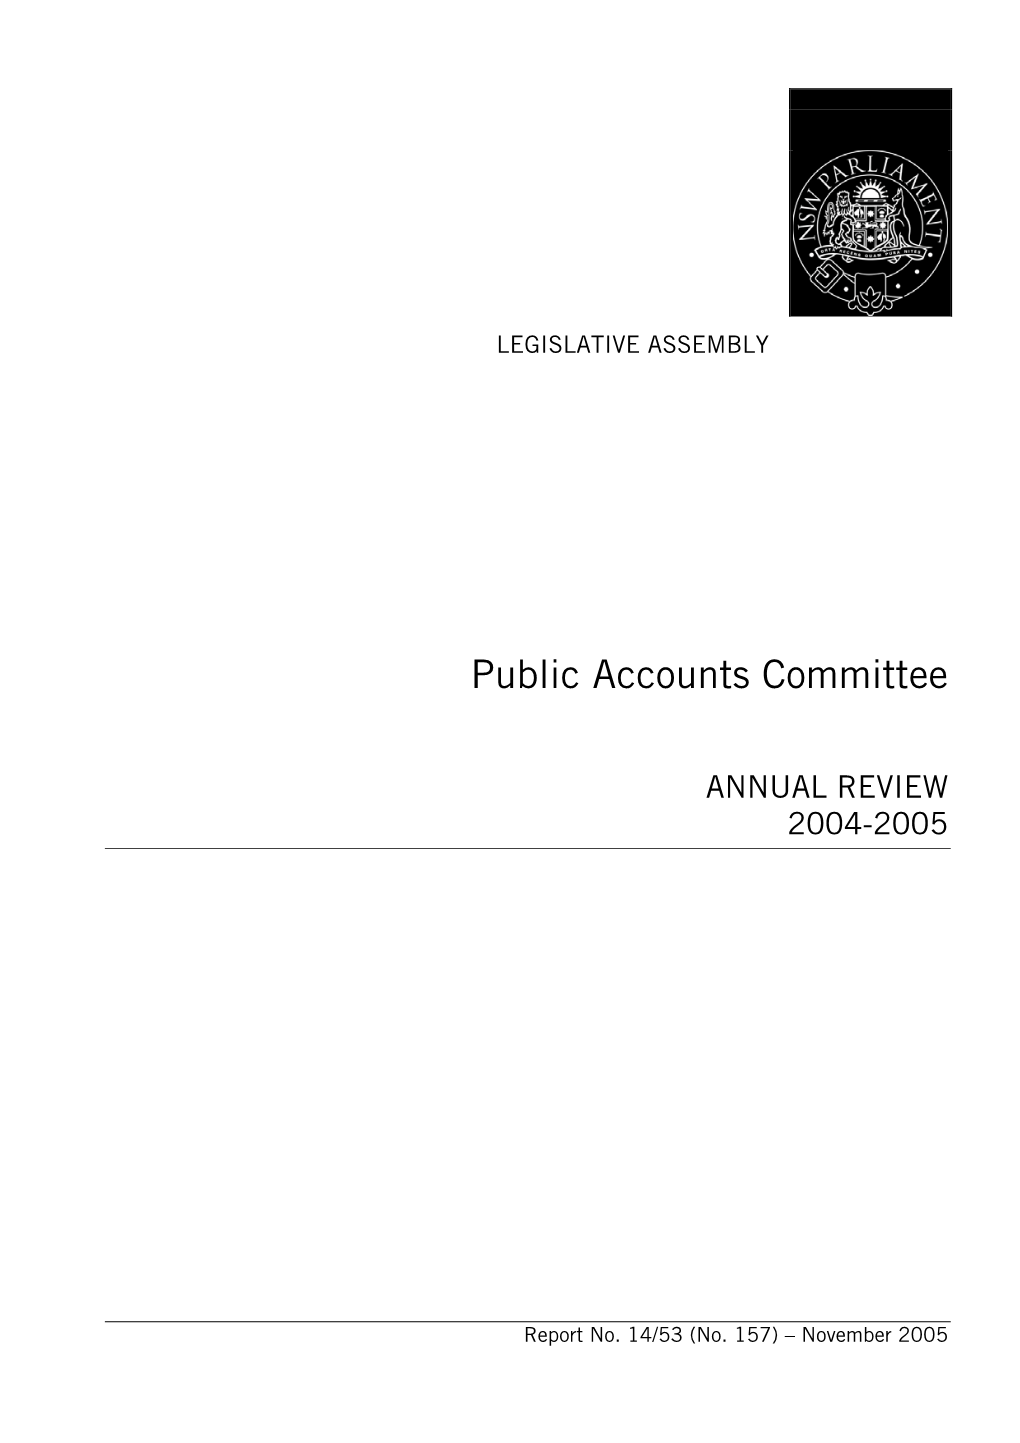 Annual Review 2004-05 For